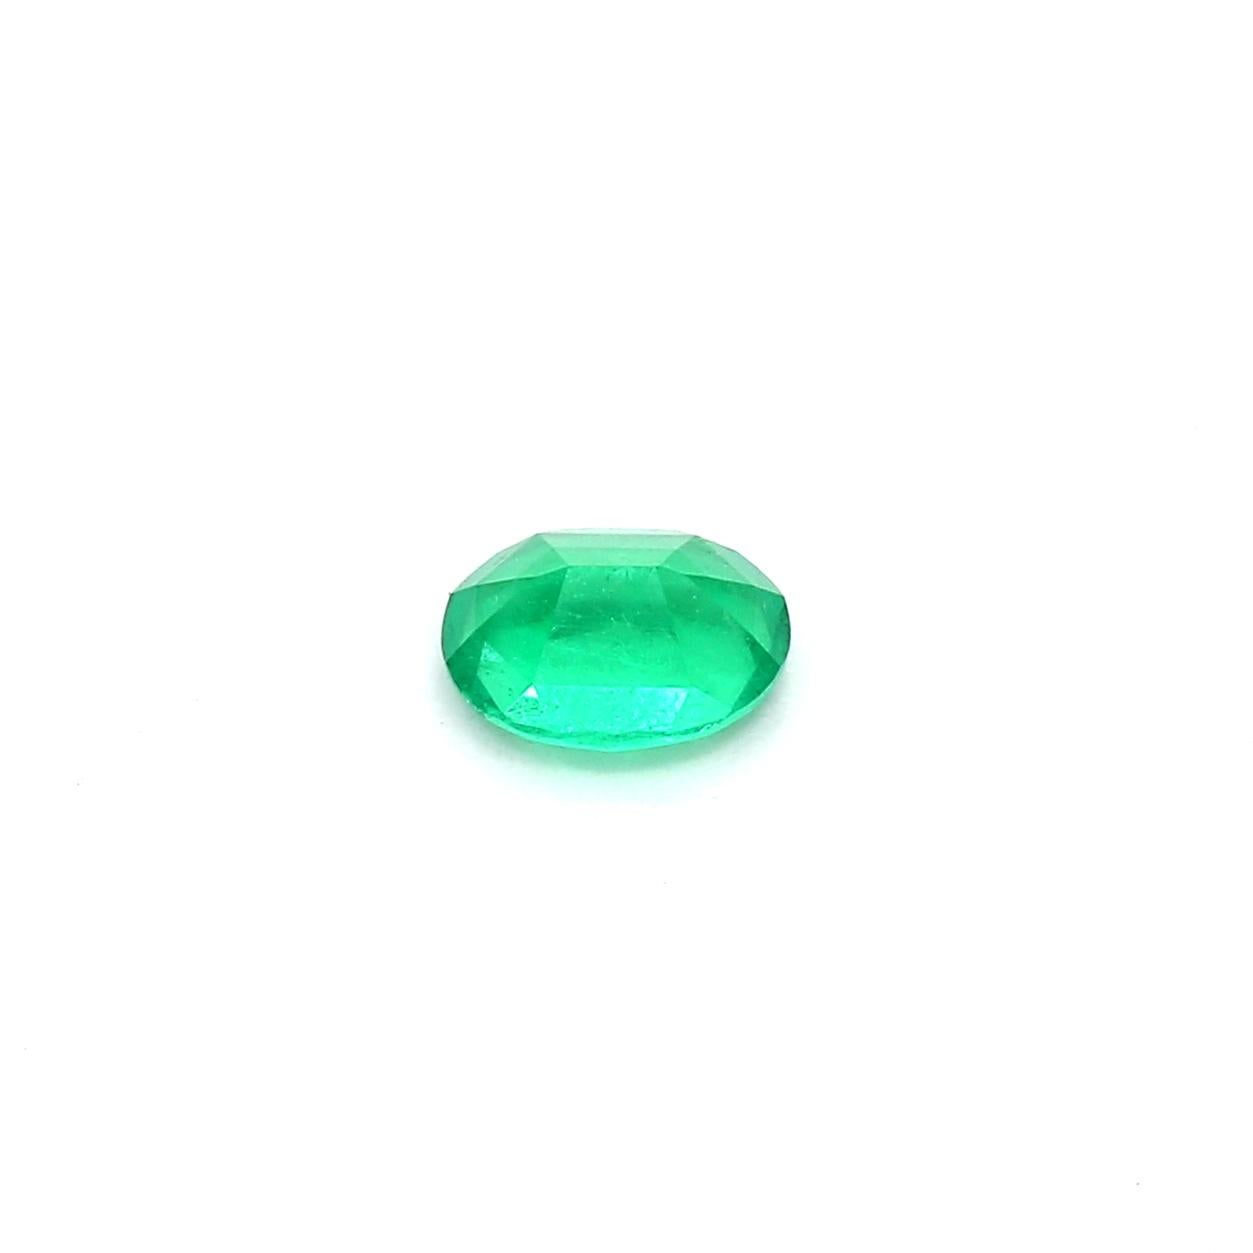 An amazing Russian Emerald which allows jewelers to create a unique piece of wearable art.
This exceptional quality gemstone would make a custom-made jewelry design. Perfect for a Ring or Pendant.

Shape - Oval
Weight - 0.51 ct
Treatment -